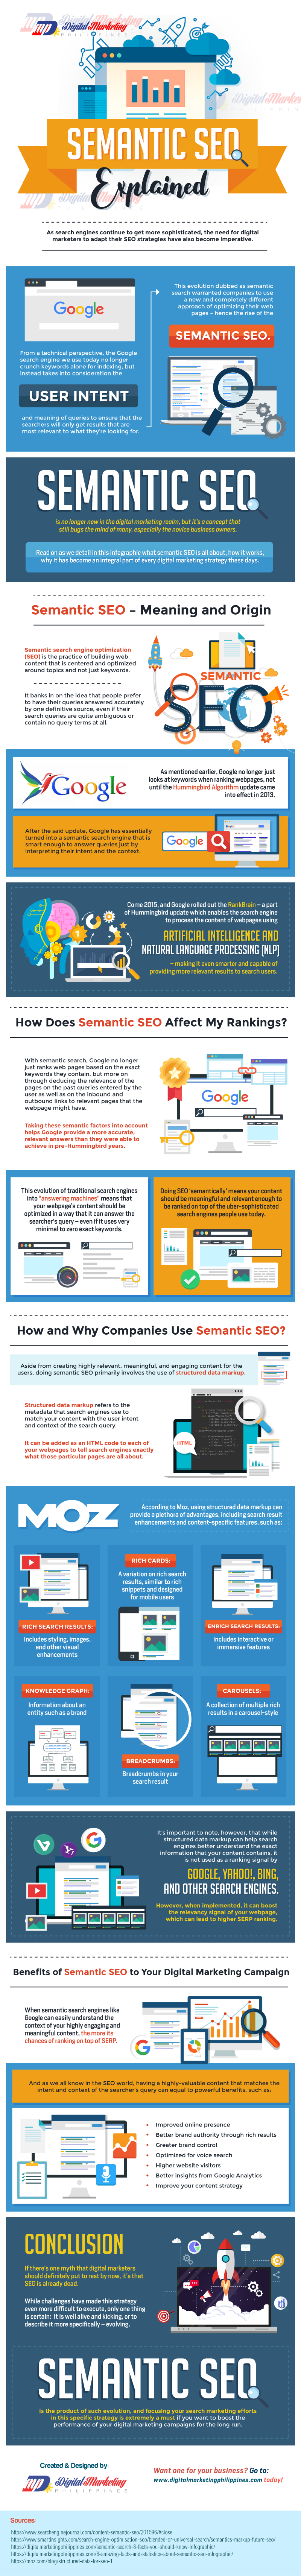 semantic-seo-explained-infographic.png